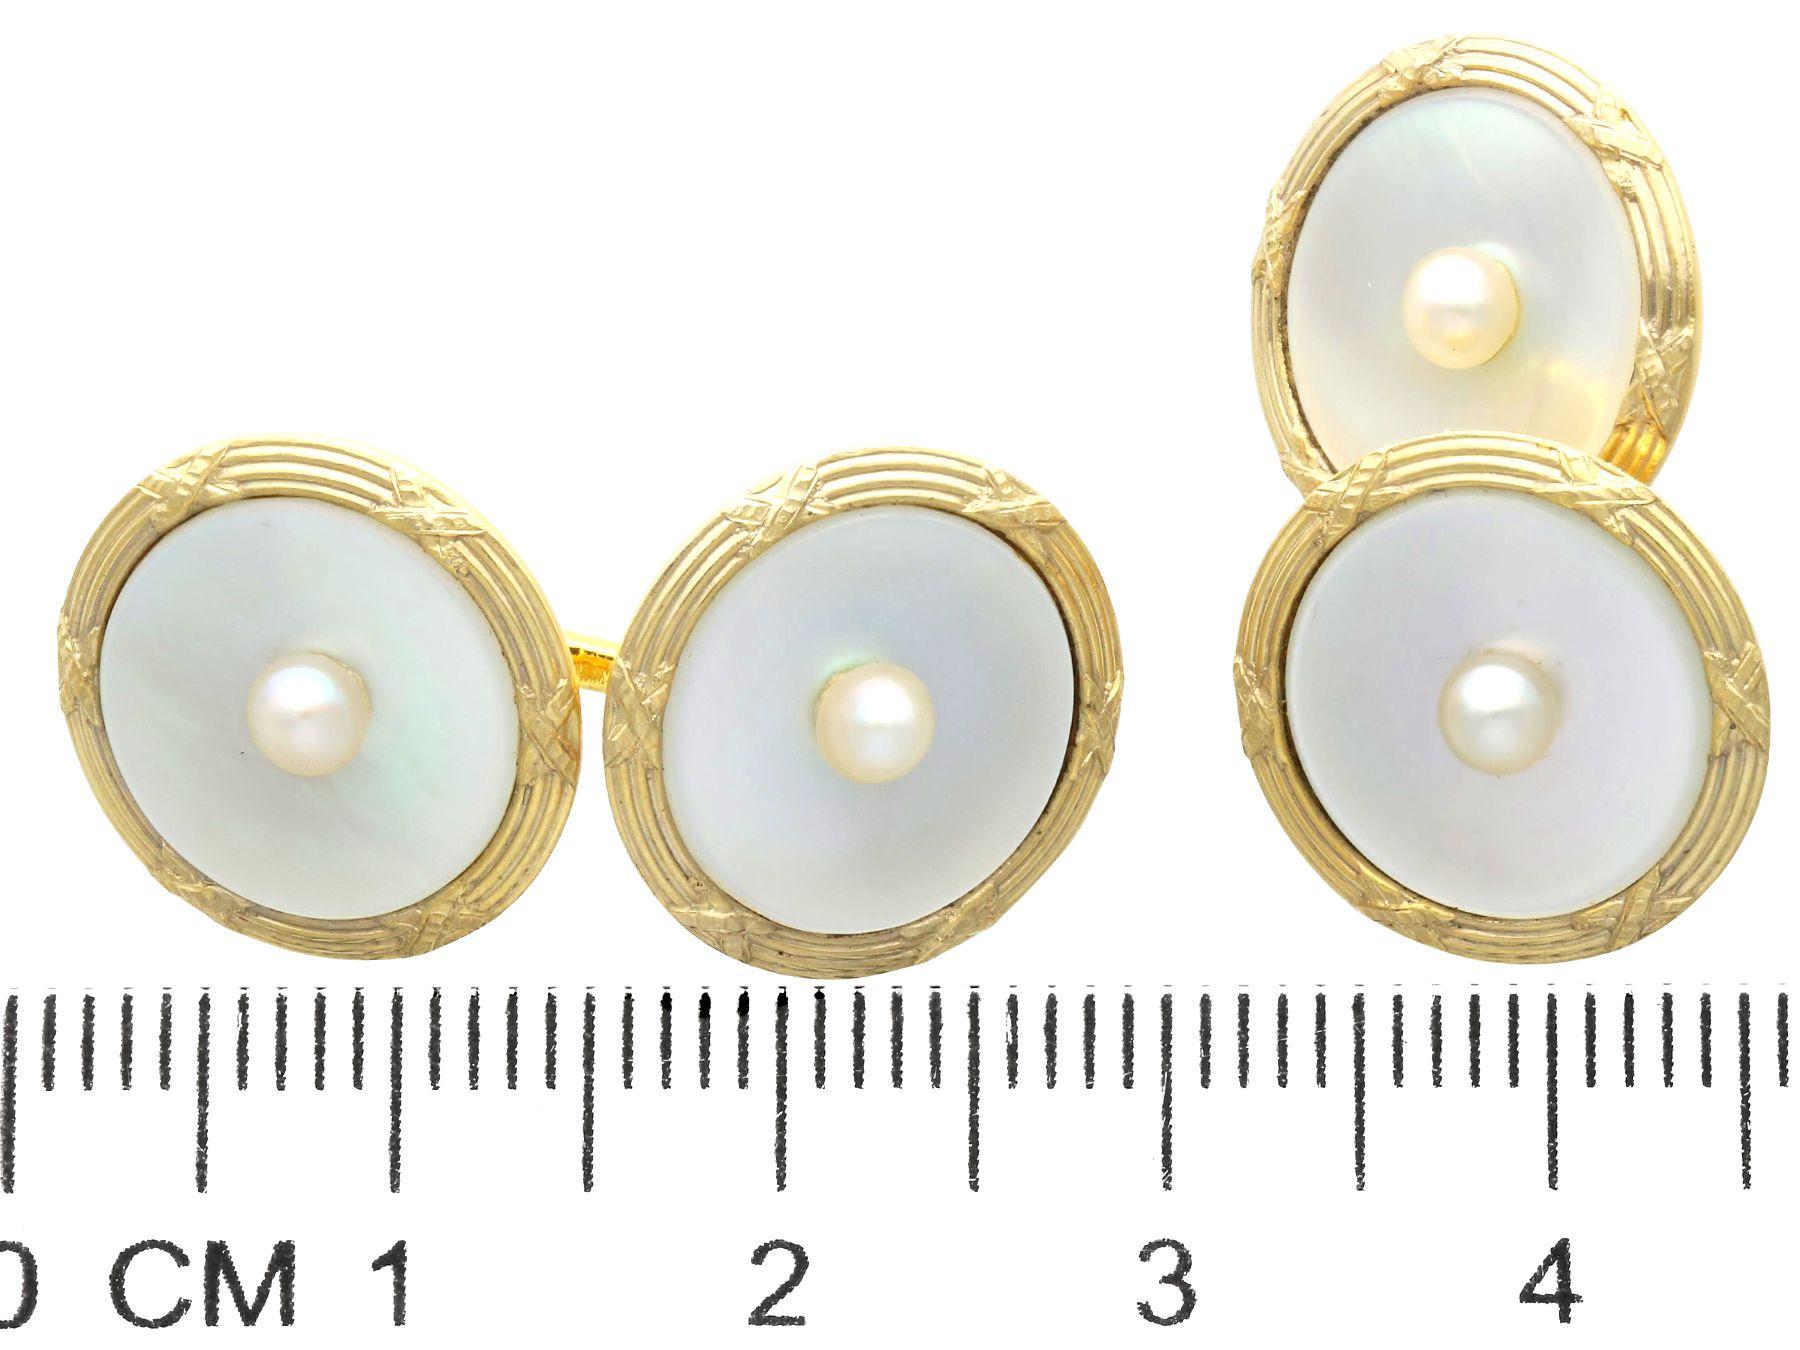 antique mother of pearl cufflinks